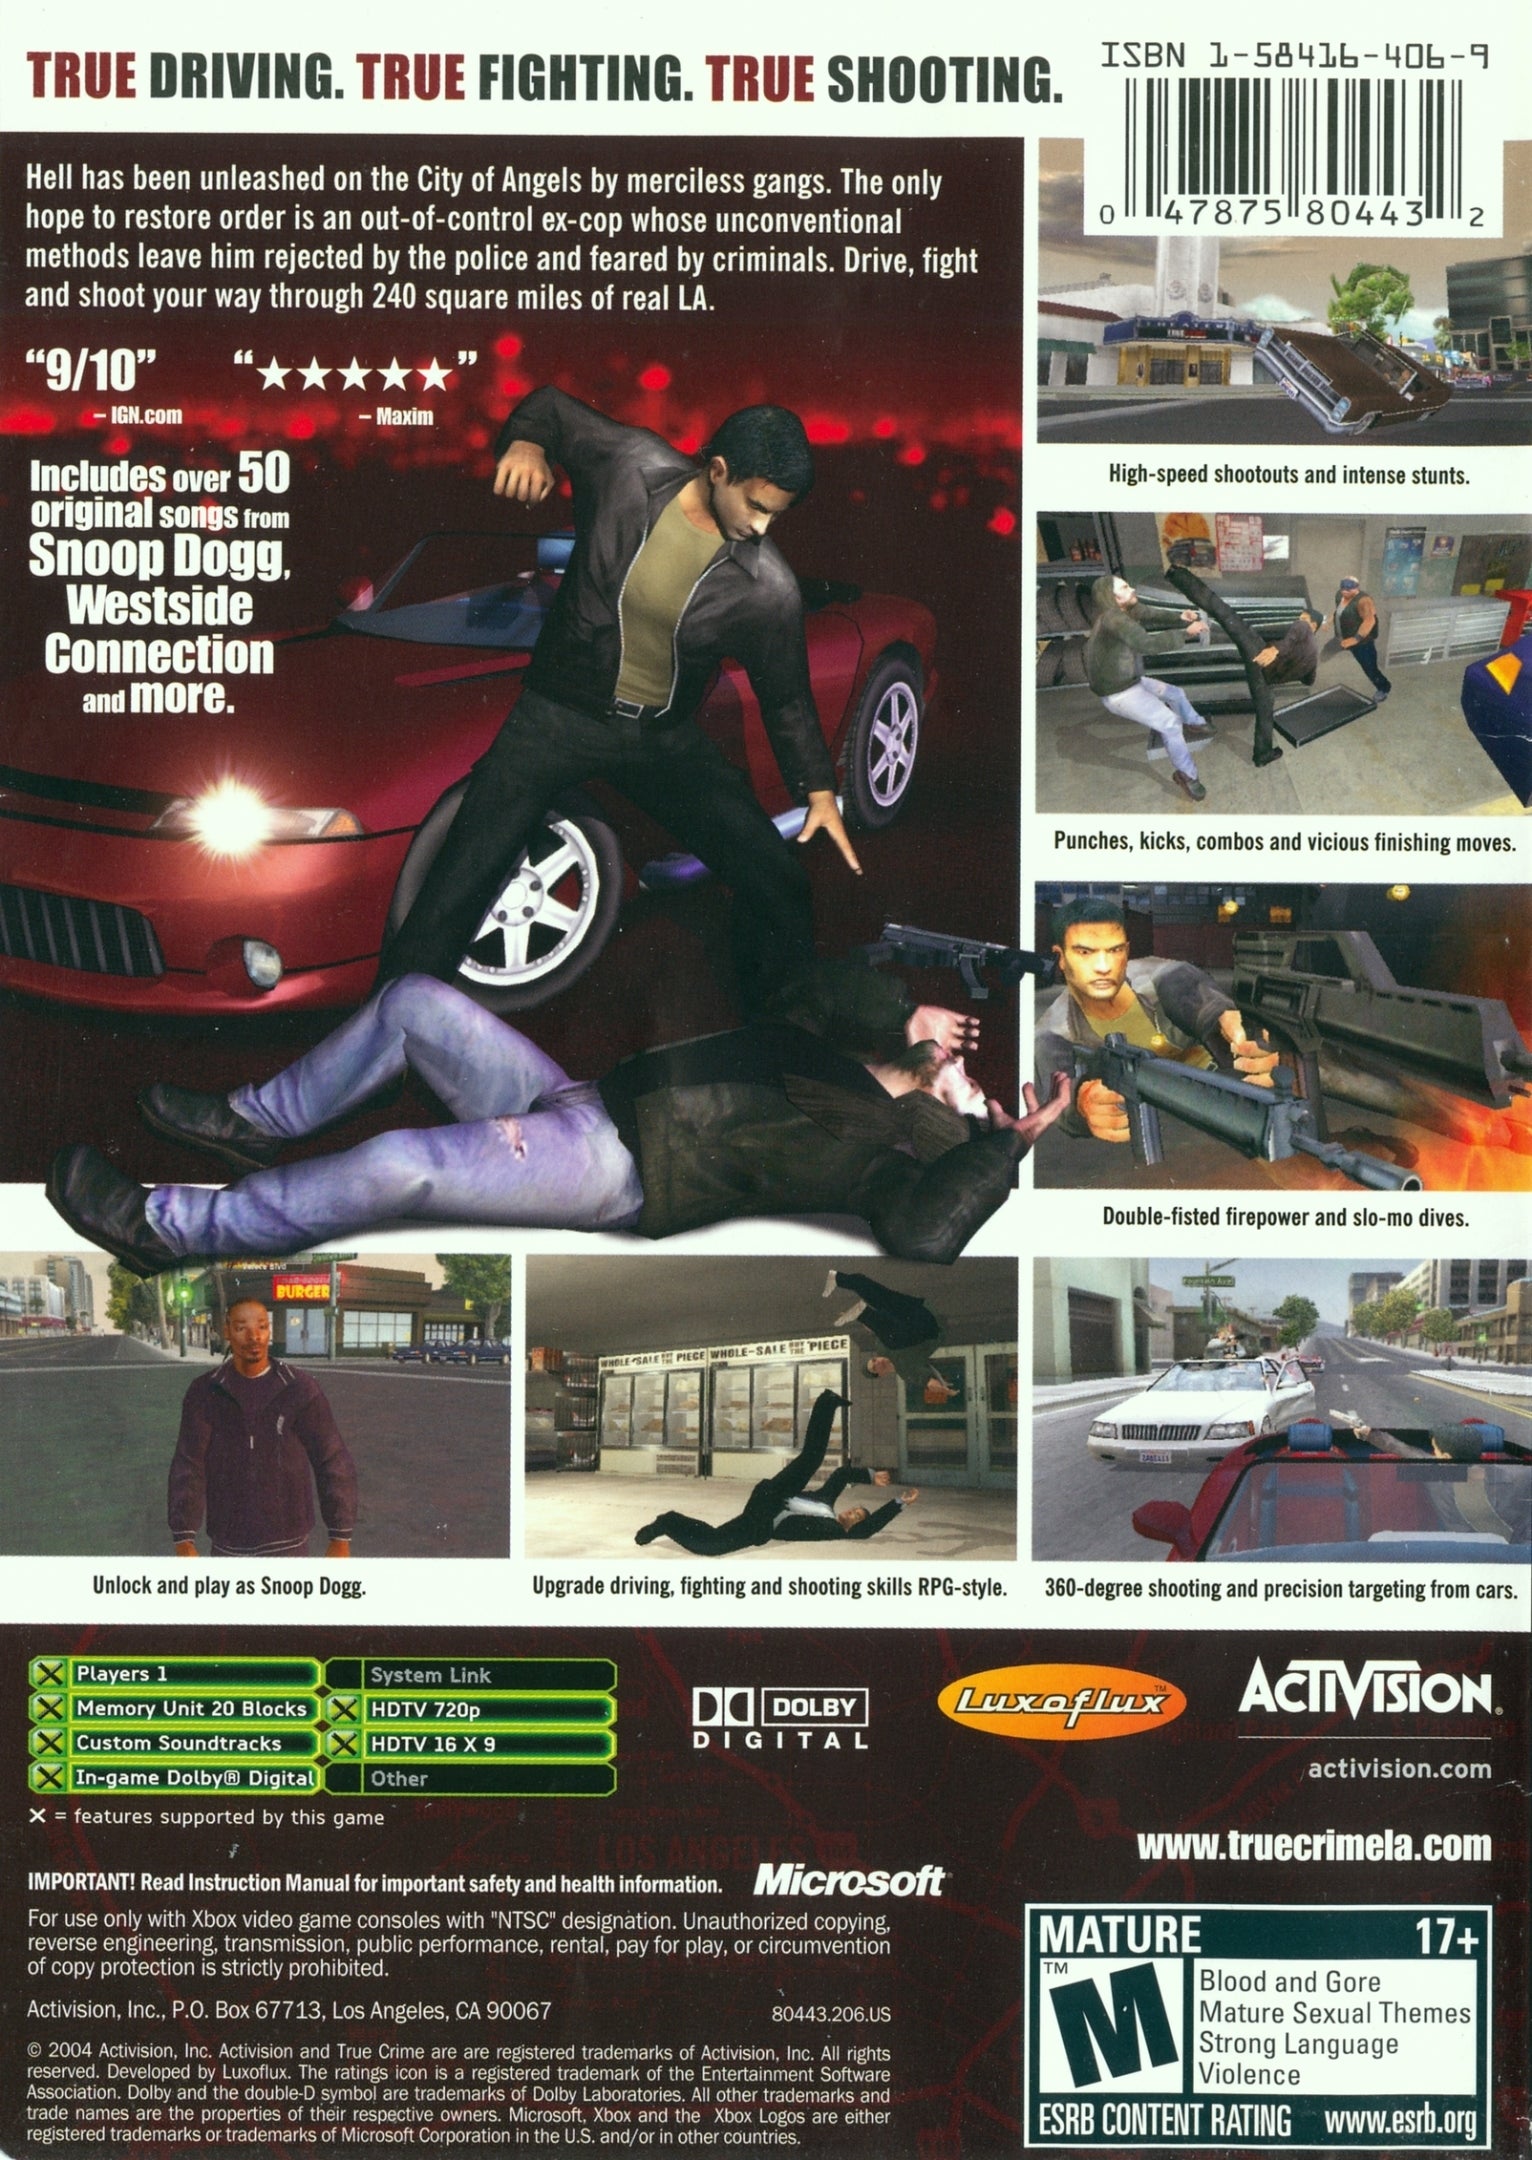 True Crime: Streets of LA (Platinum Hits) - (XB) Xbox [Pre-Owned] Video Games Activision   